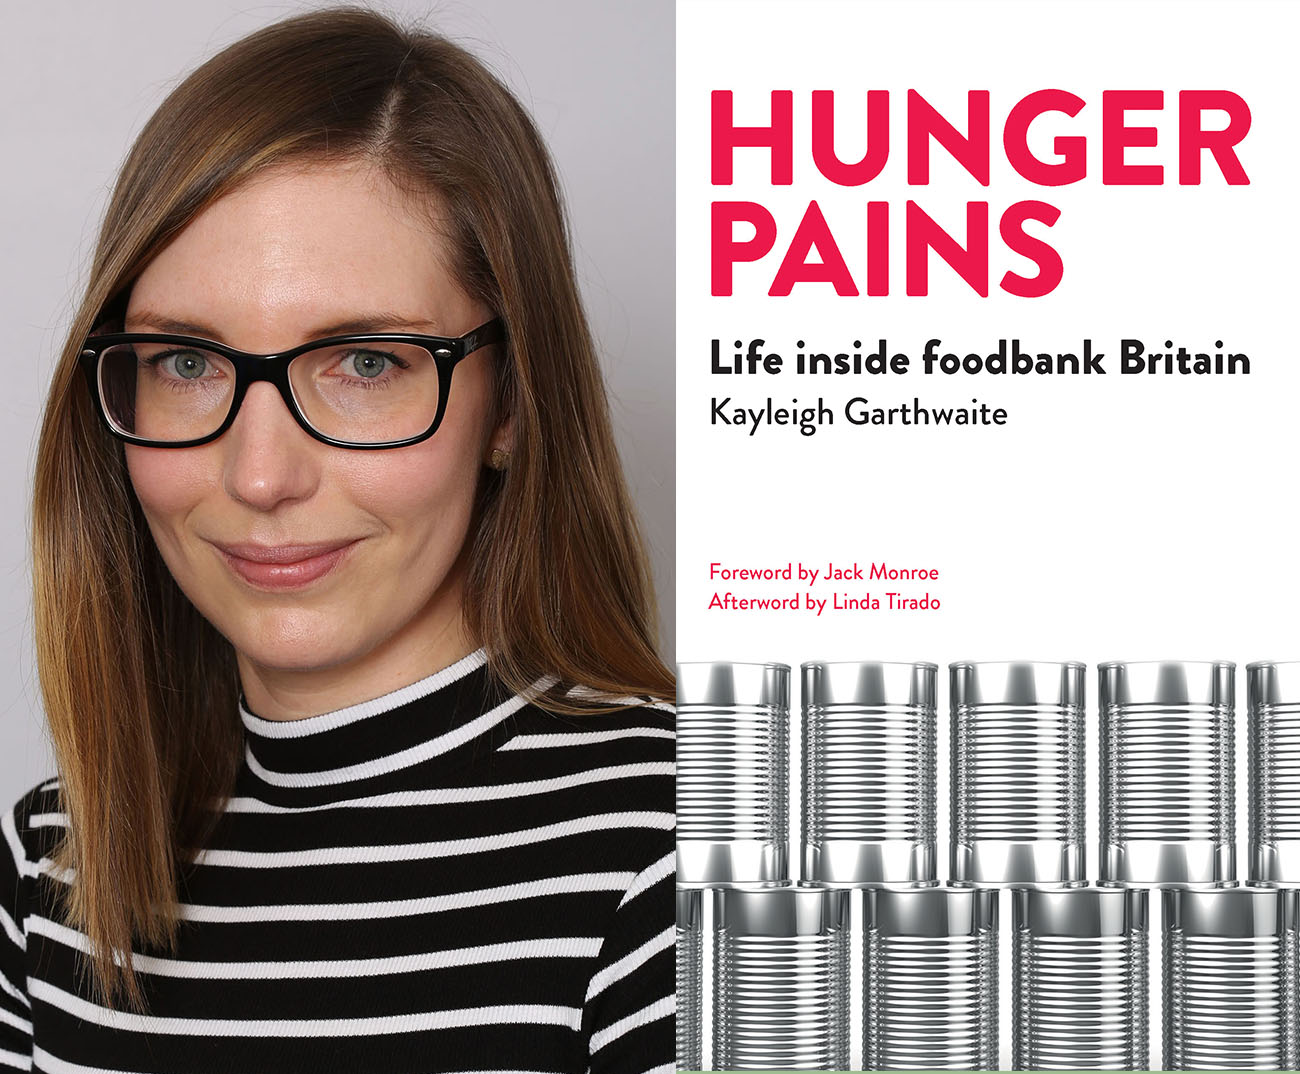 Sanctions and payment delays major cause of hunger: Kayleigh Garthwaite in the Guardian